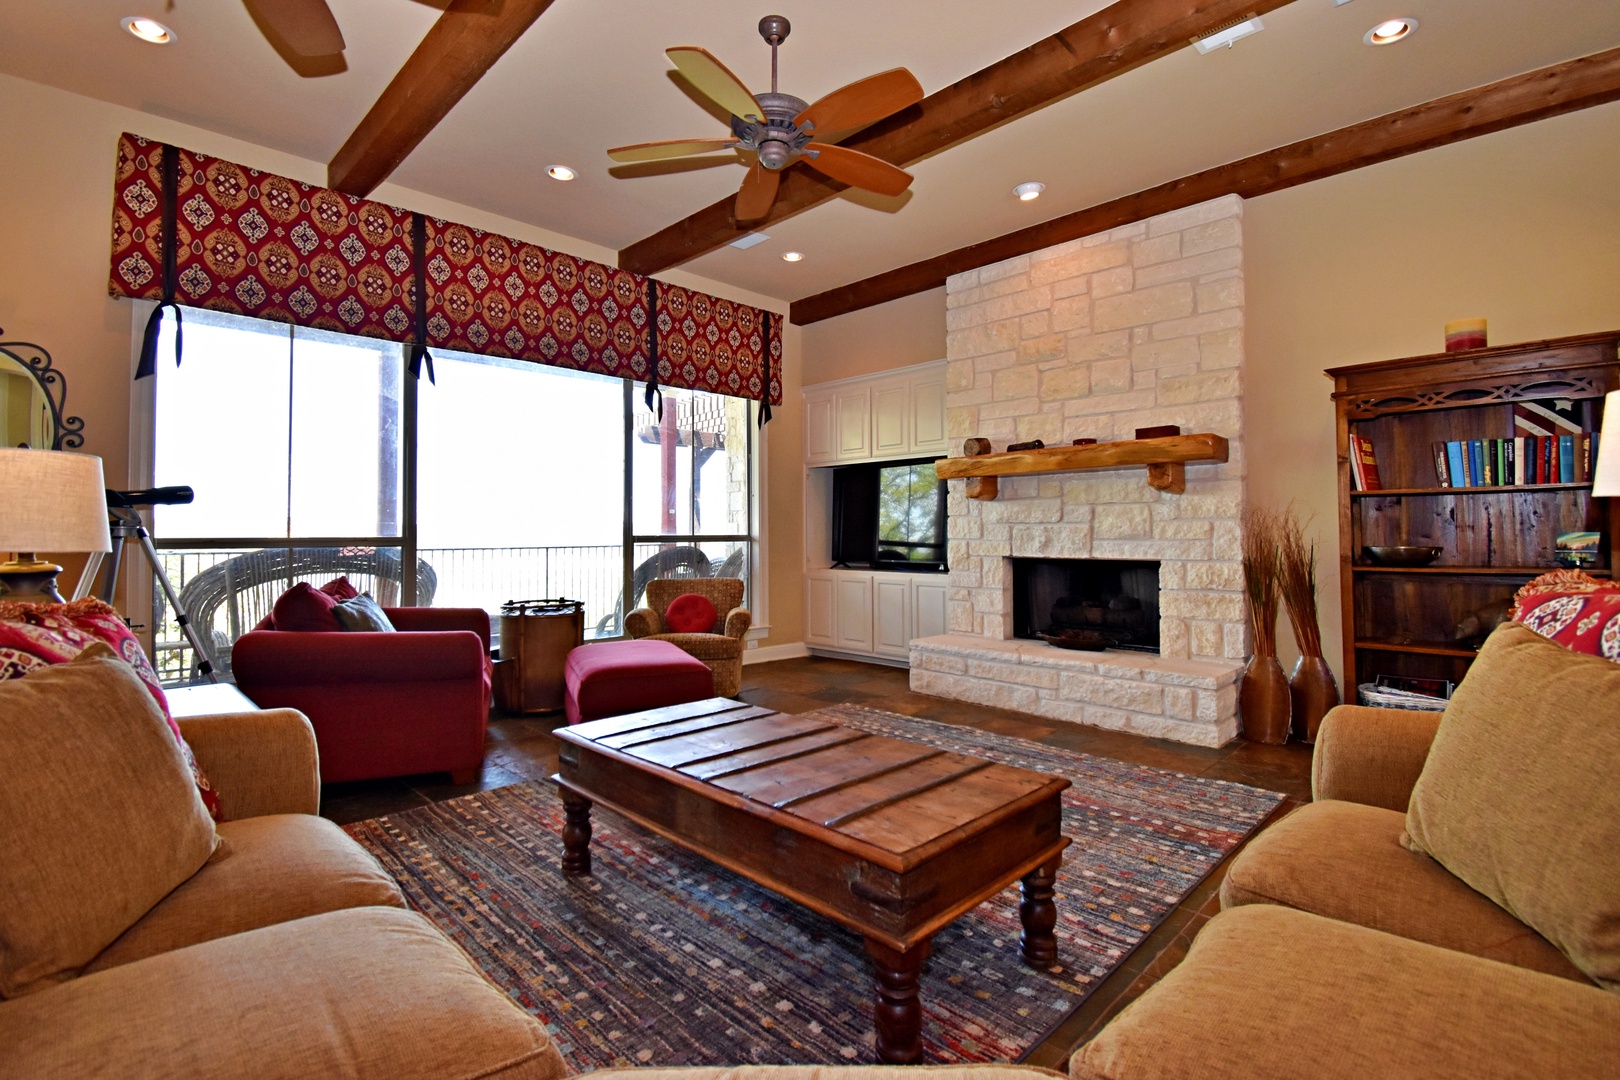 Open living space with lake view, TV, fireplace, and deck access